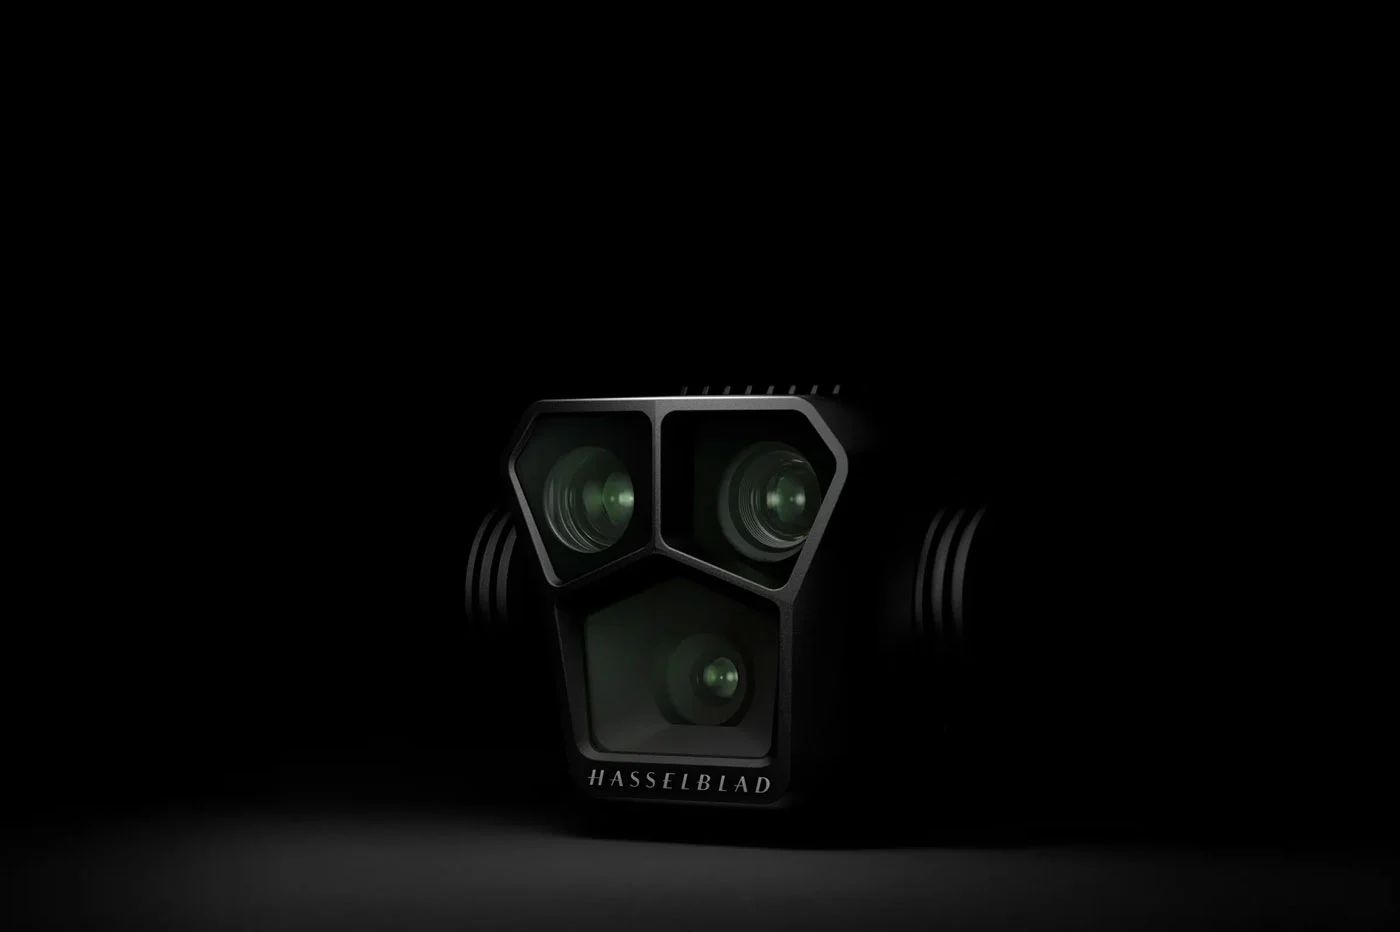 Mavic 3 Pro: DJI teases a drone equipped with a three-sensor photo block (Hasselblad)